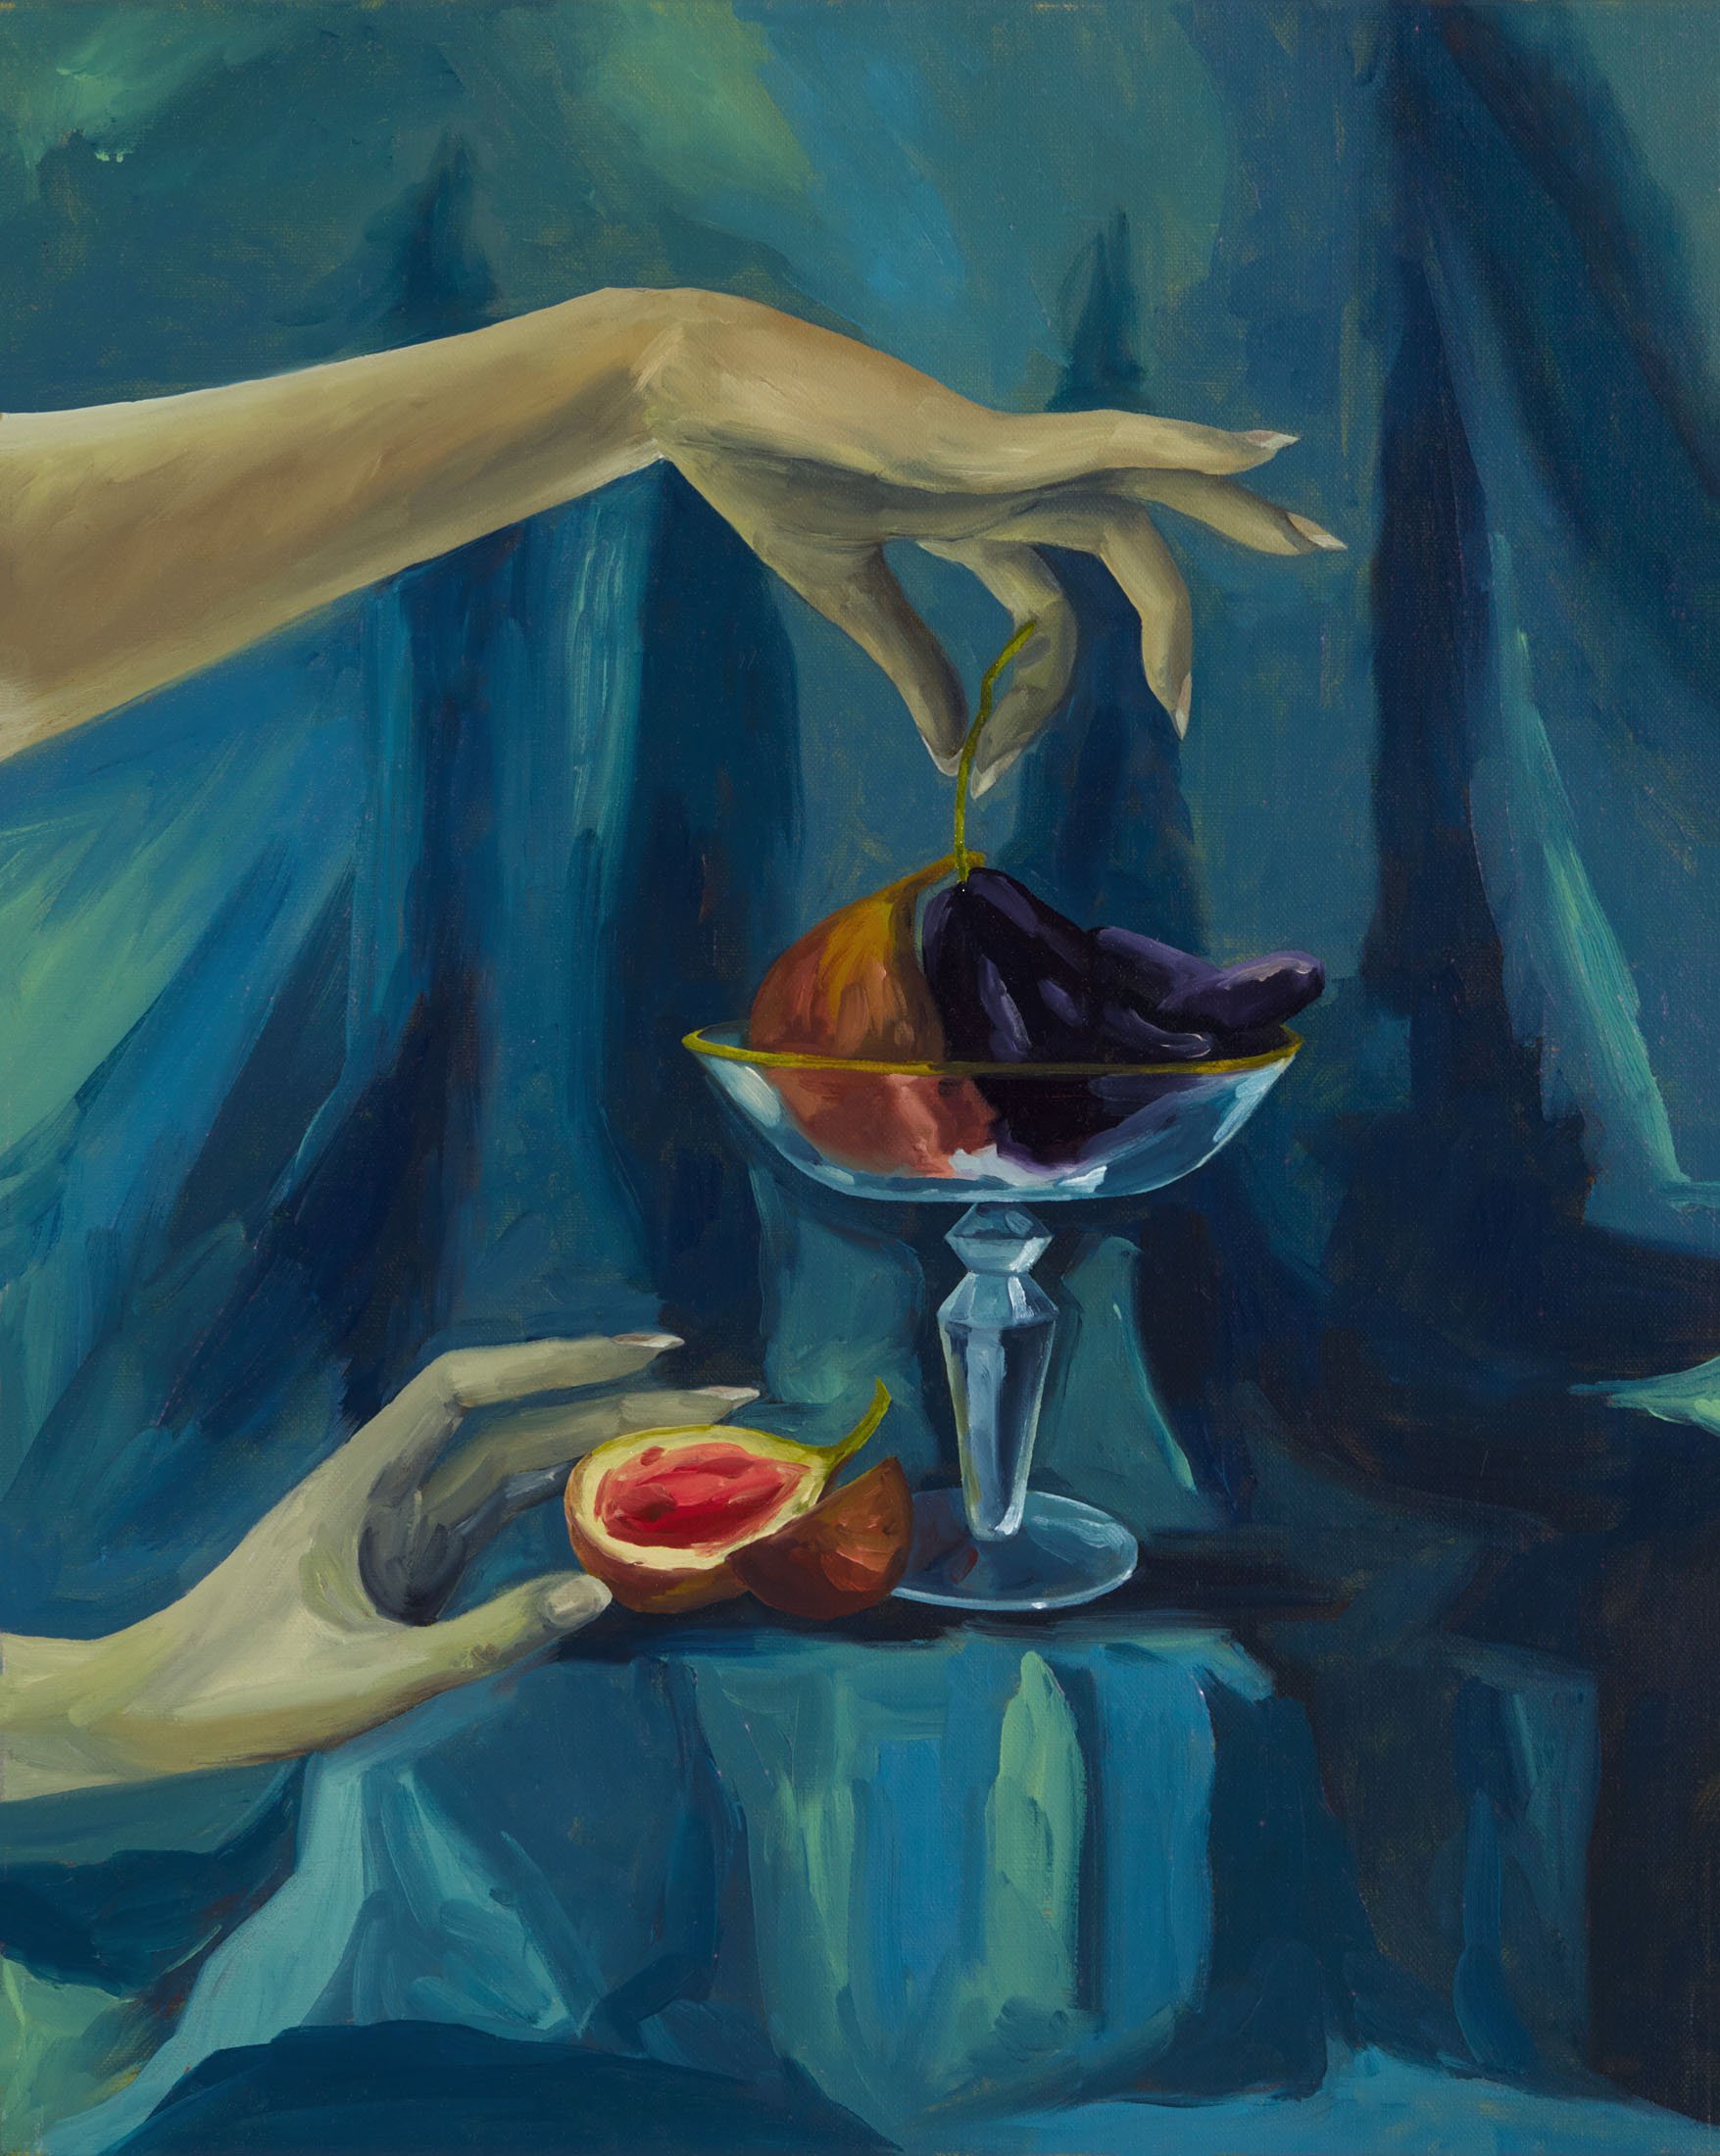  Linen, Figs and Patented Grapes, 2021 oil on linen  43.5x54 cm 